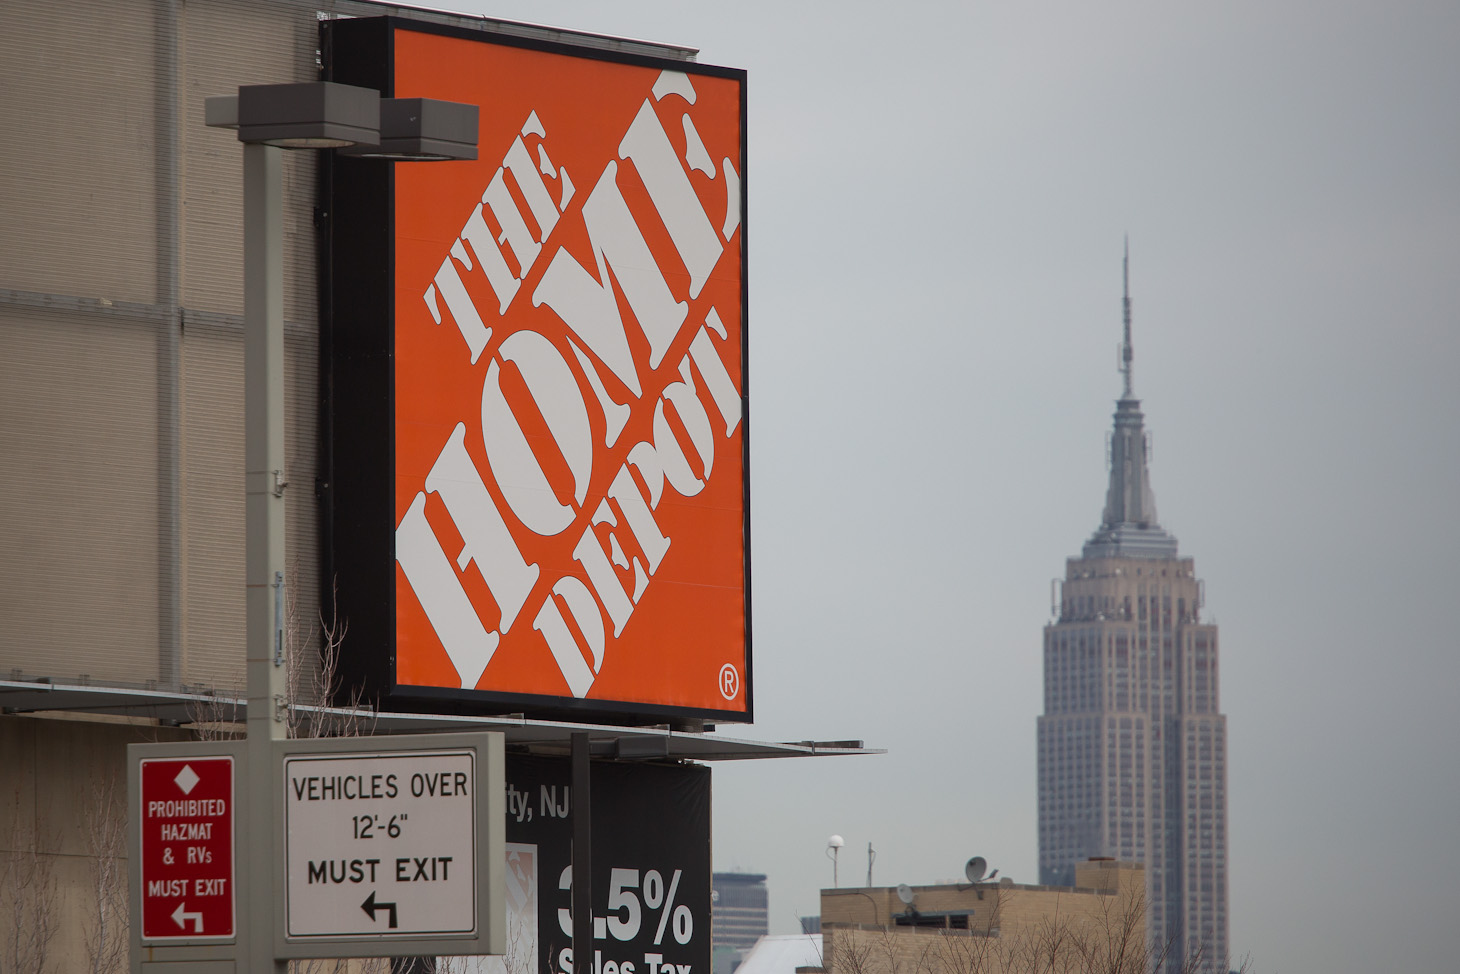  Home  Depot  to Reimburse Customers for Losses in Data 